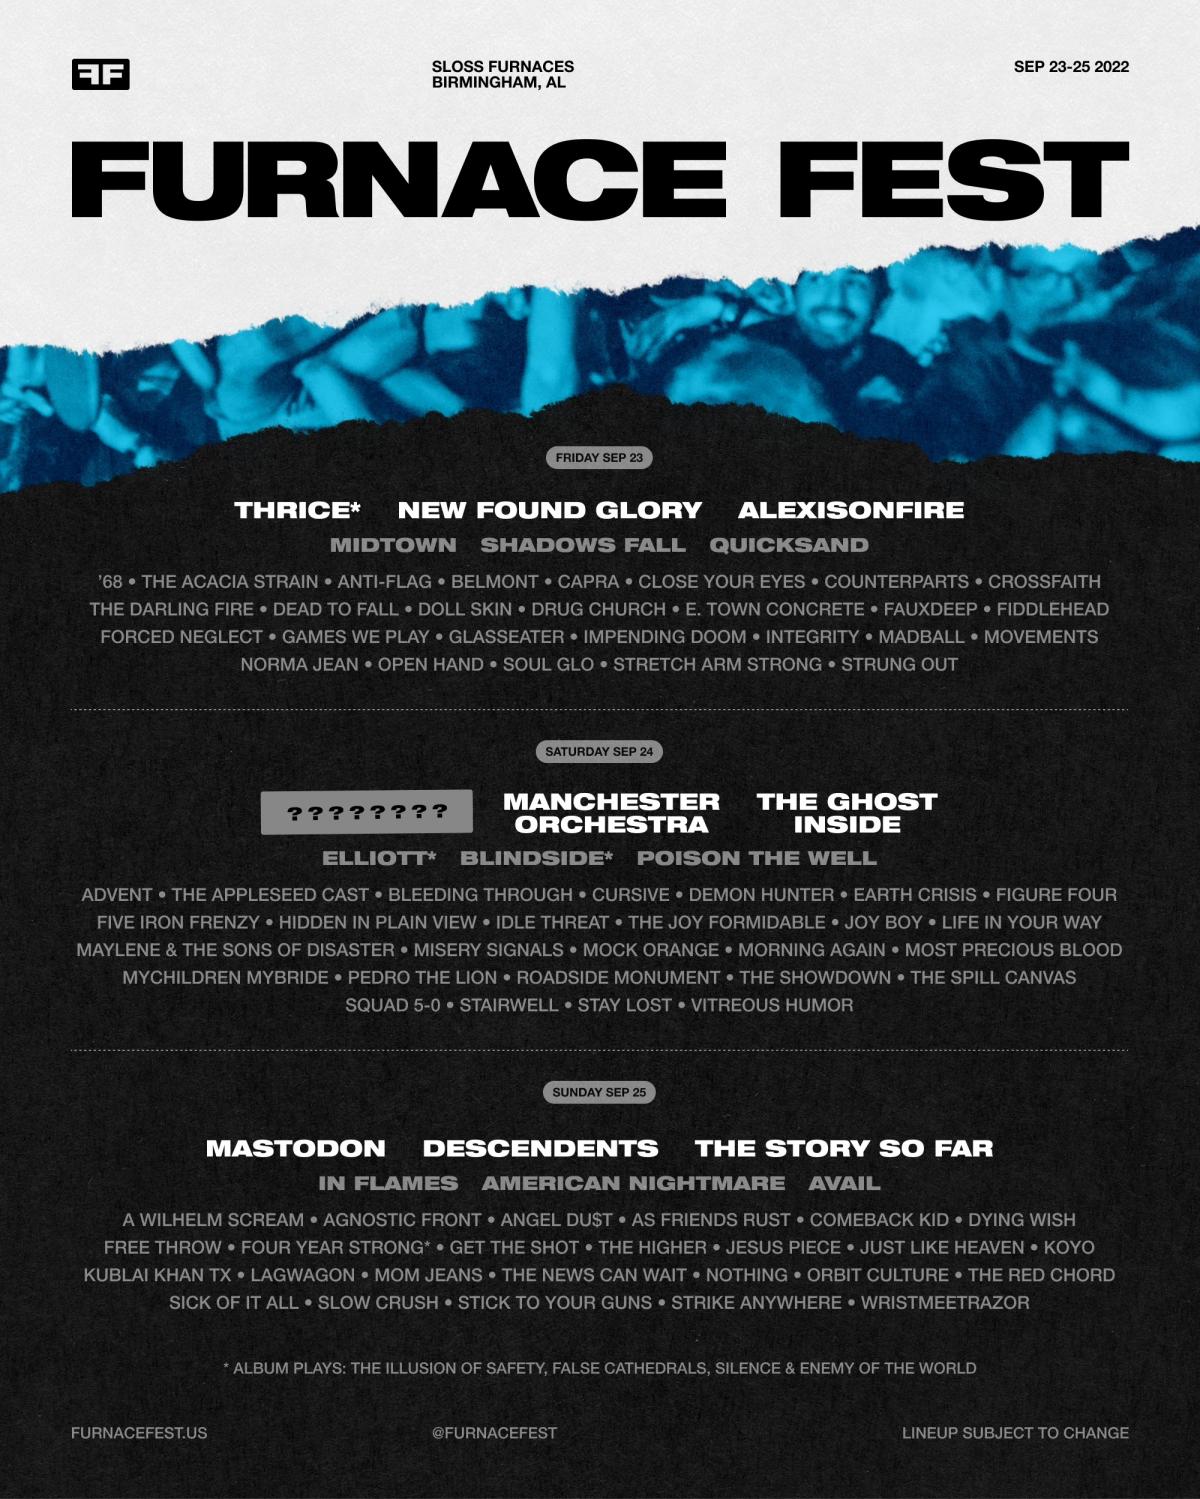 Furnace Fest 2022 Lineup Mastodon, Thrice, Descendents, Alexisonfire, Manchester Orchestra, and